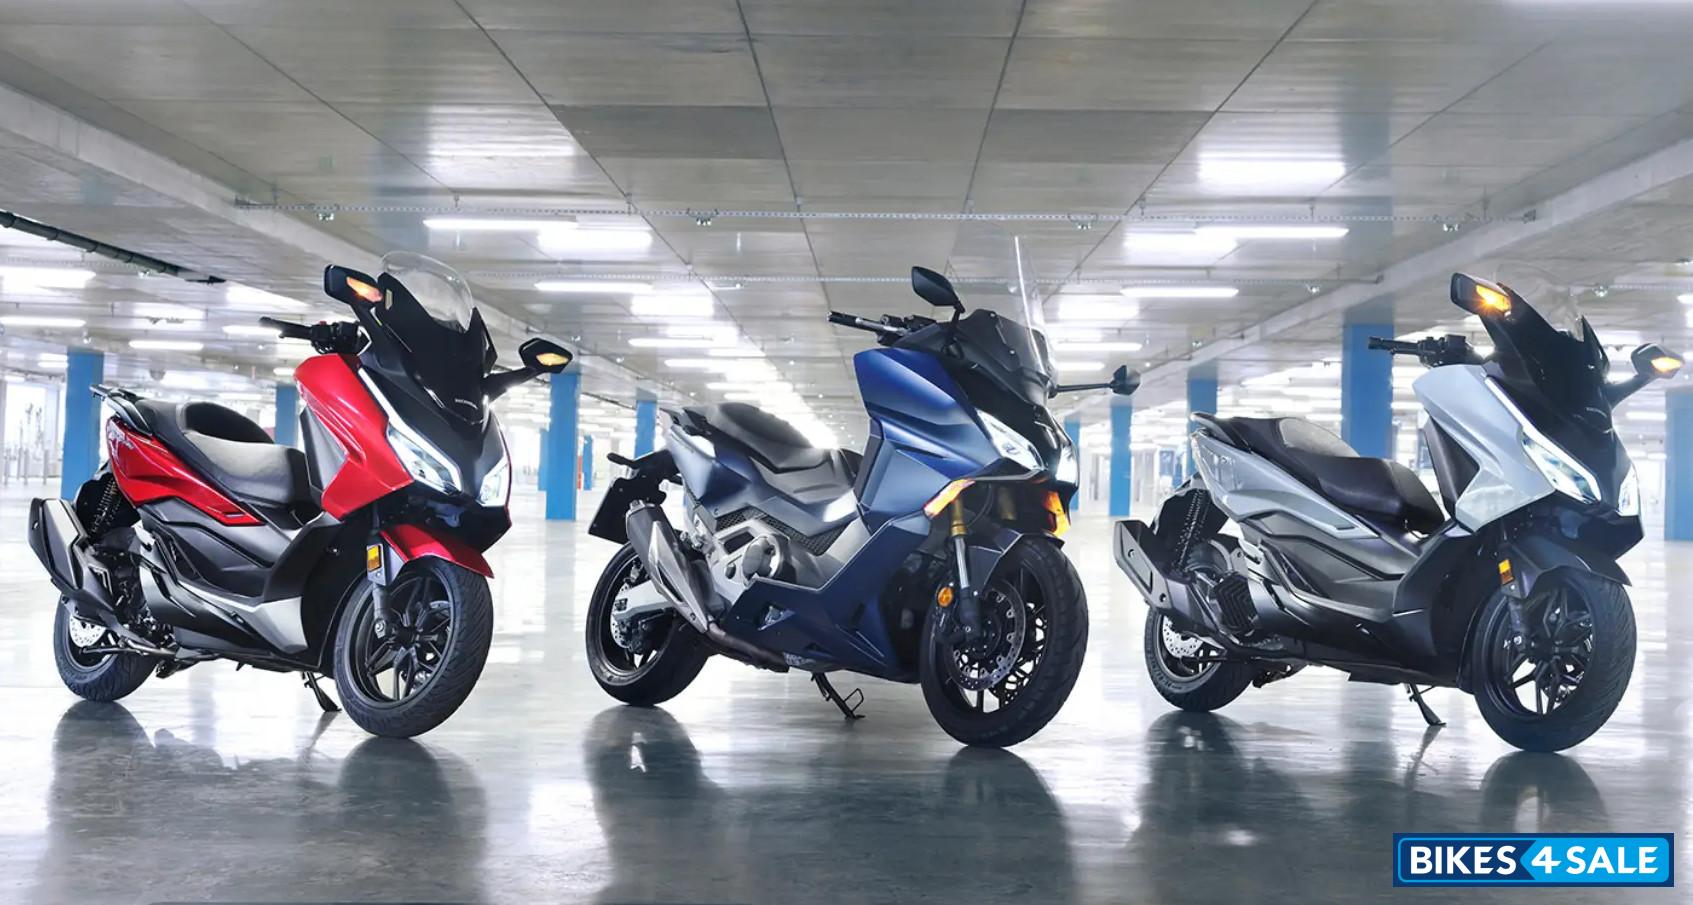 Honda - new colors for the ADV 350, Forza 125 and Forza 350 - Motorcycle  Sports